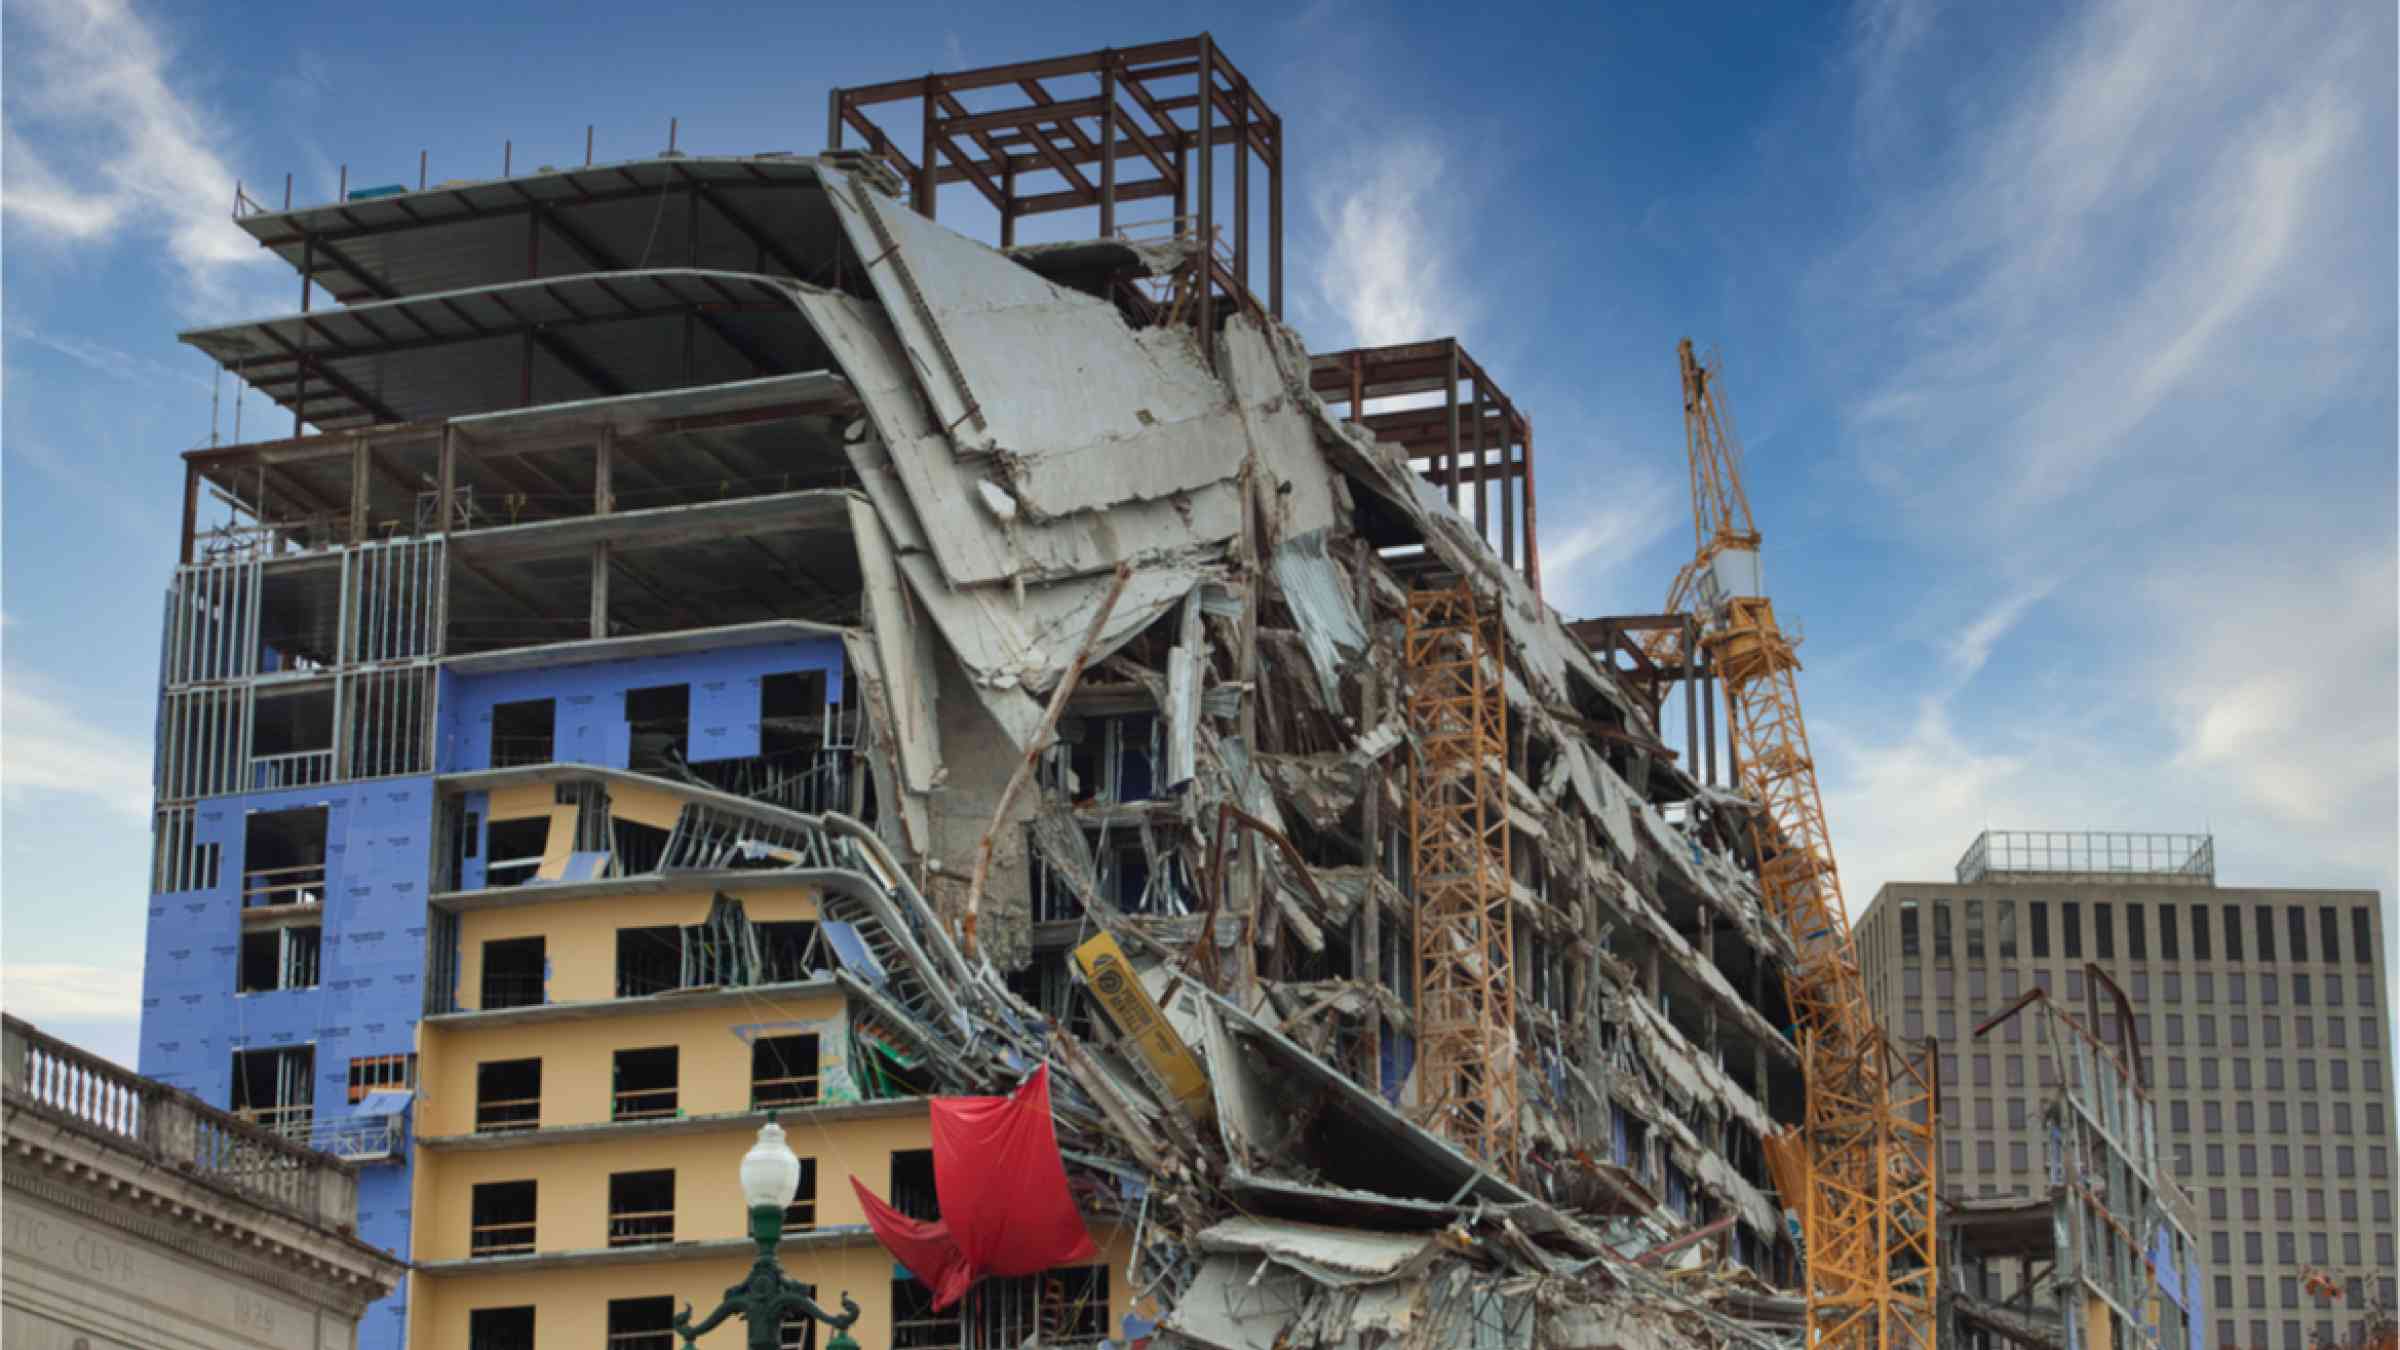 On 23 December 2019, the Hard Rock Hotel building construction collapsed in New Orleans.